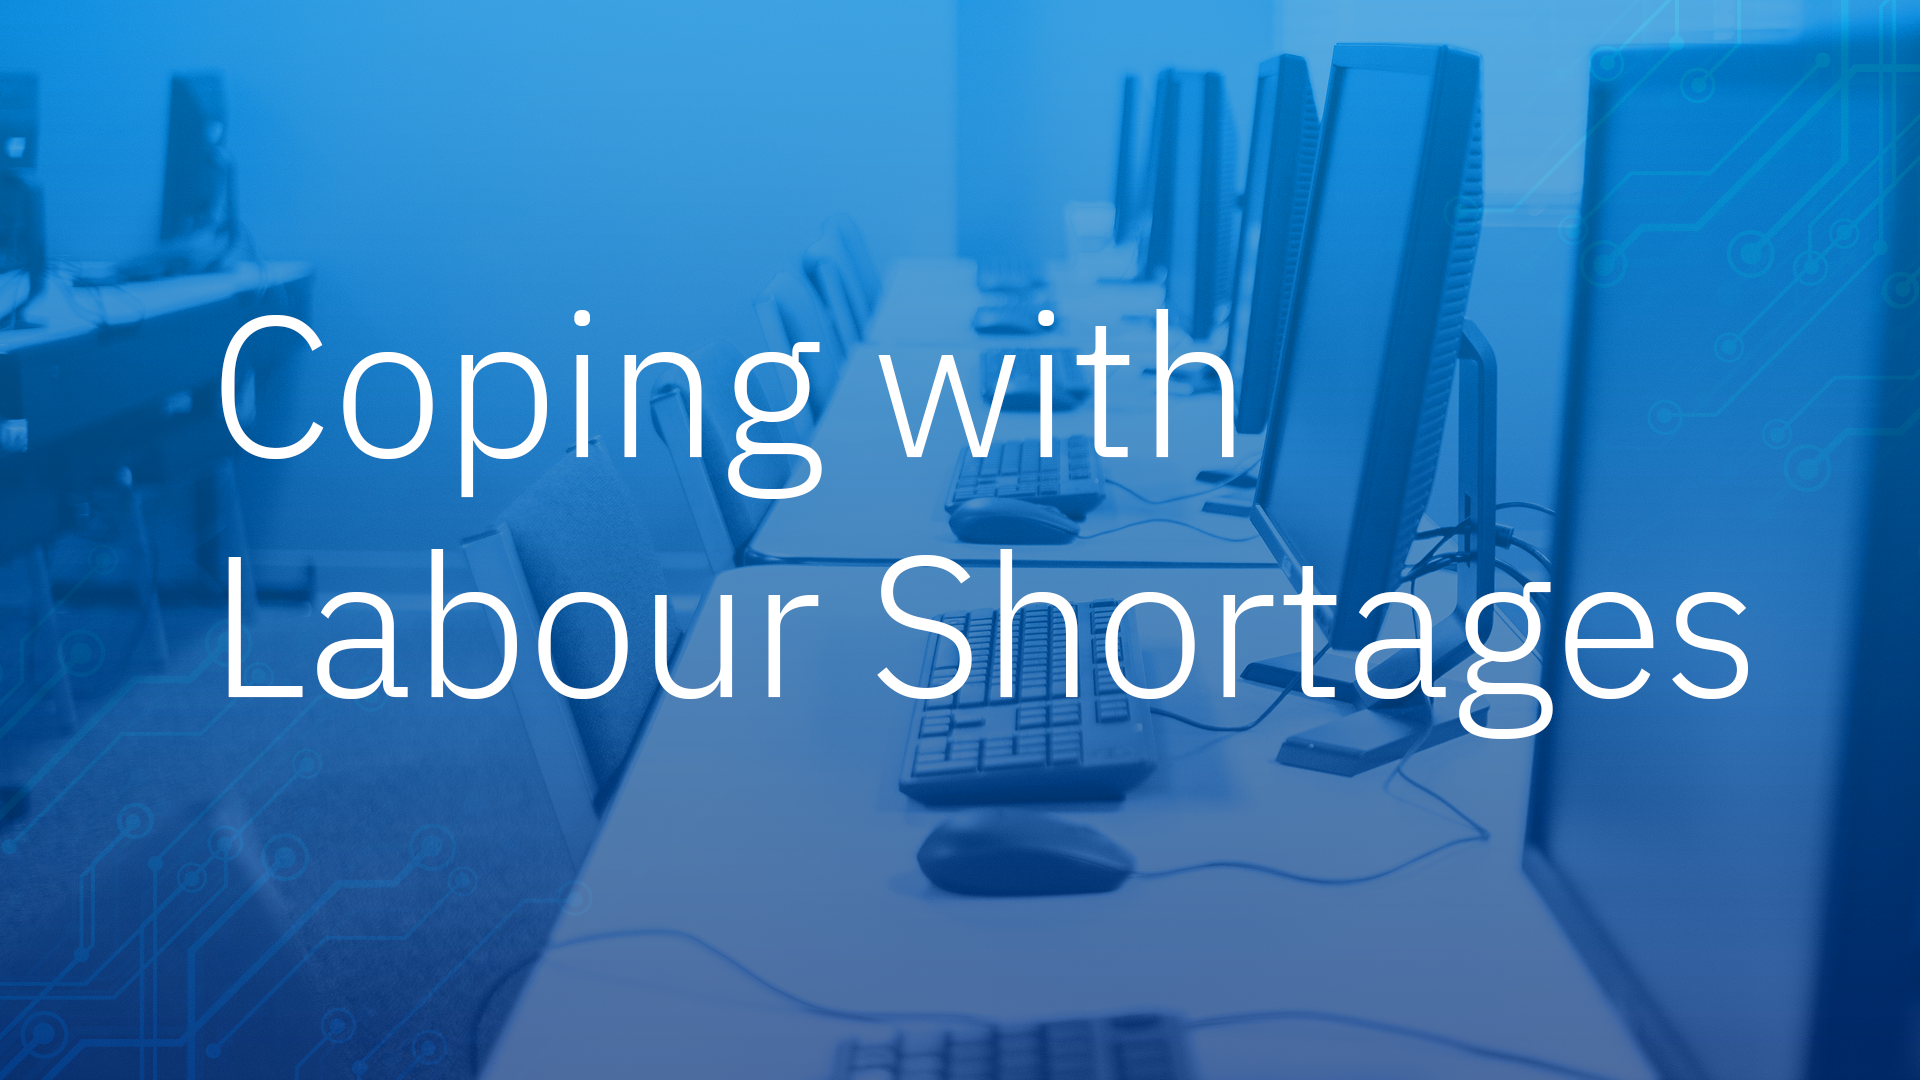 Coping with Labour Shortages: Implement IT Solutions to Reduce Reliance on In-House IT Teams